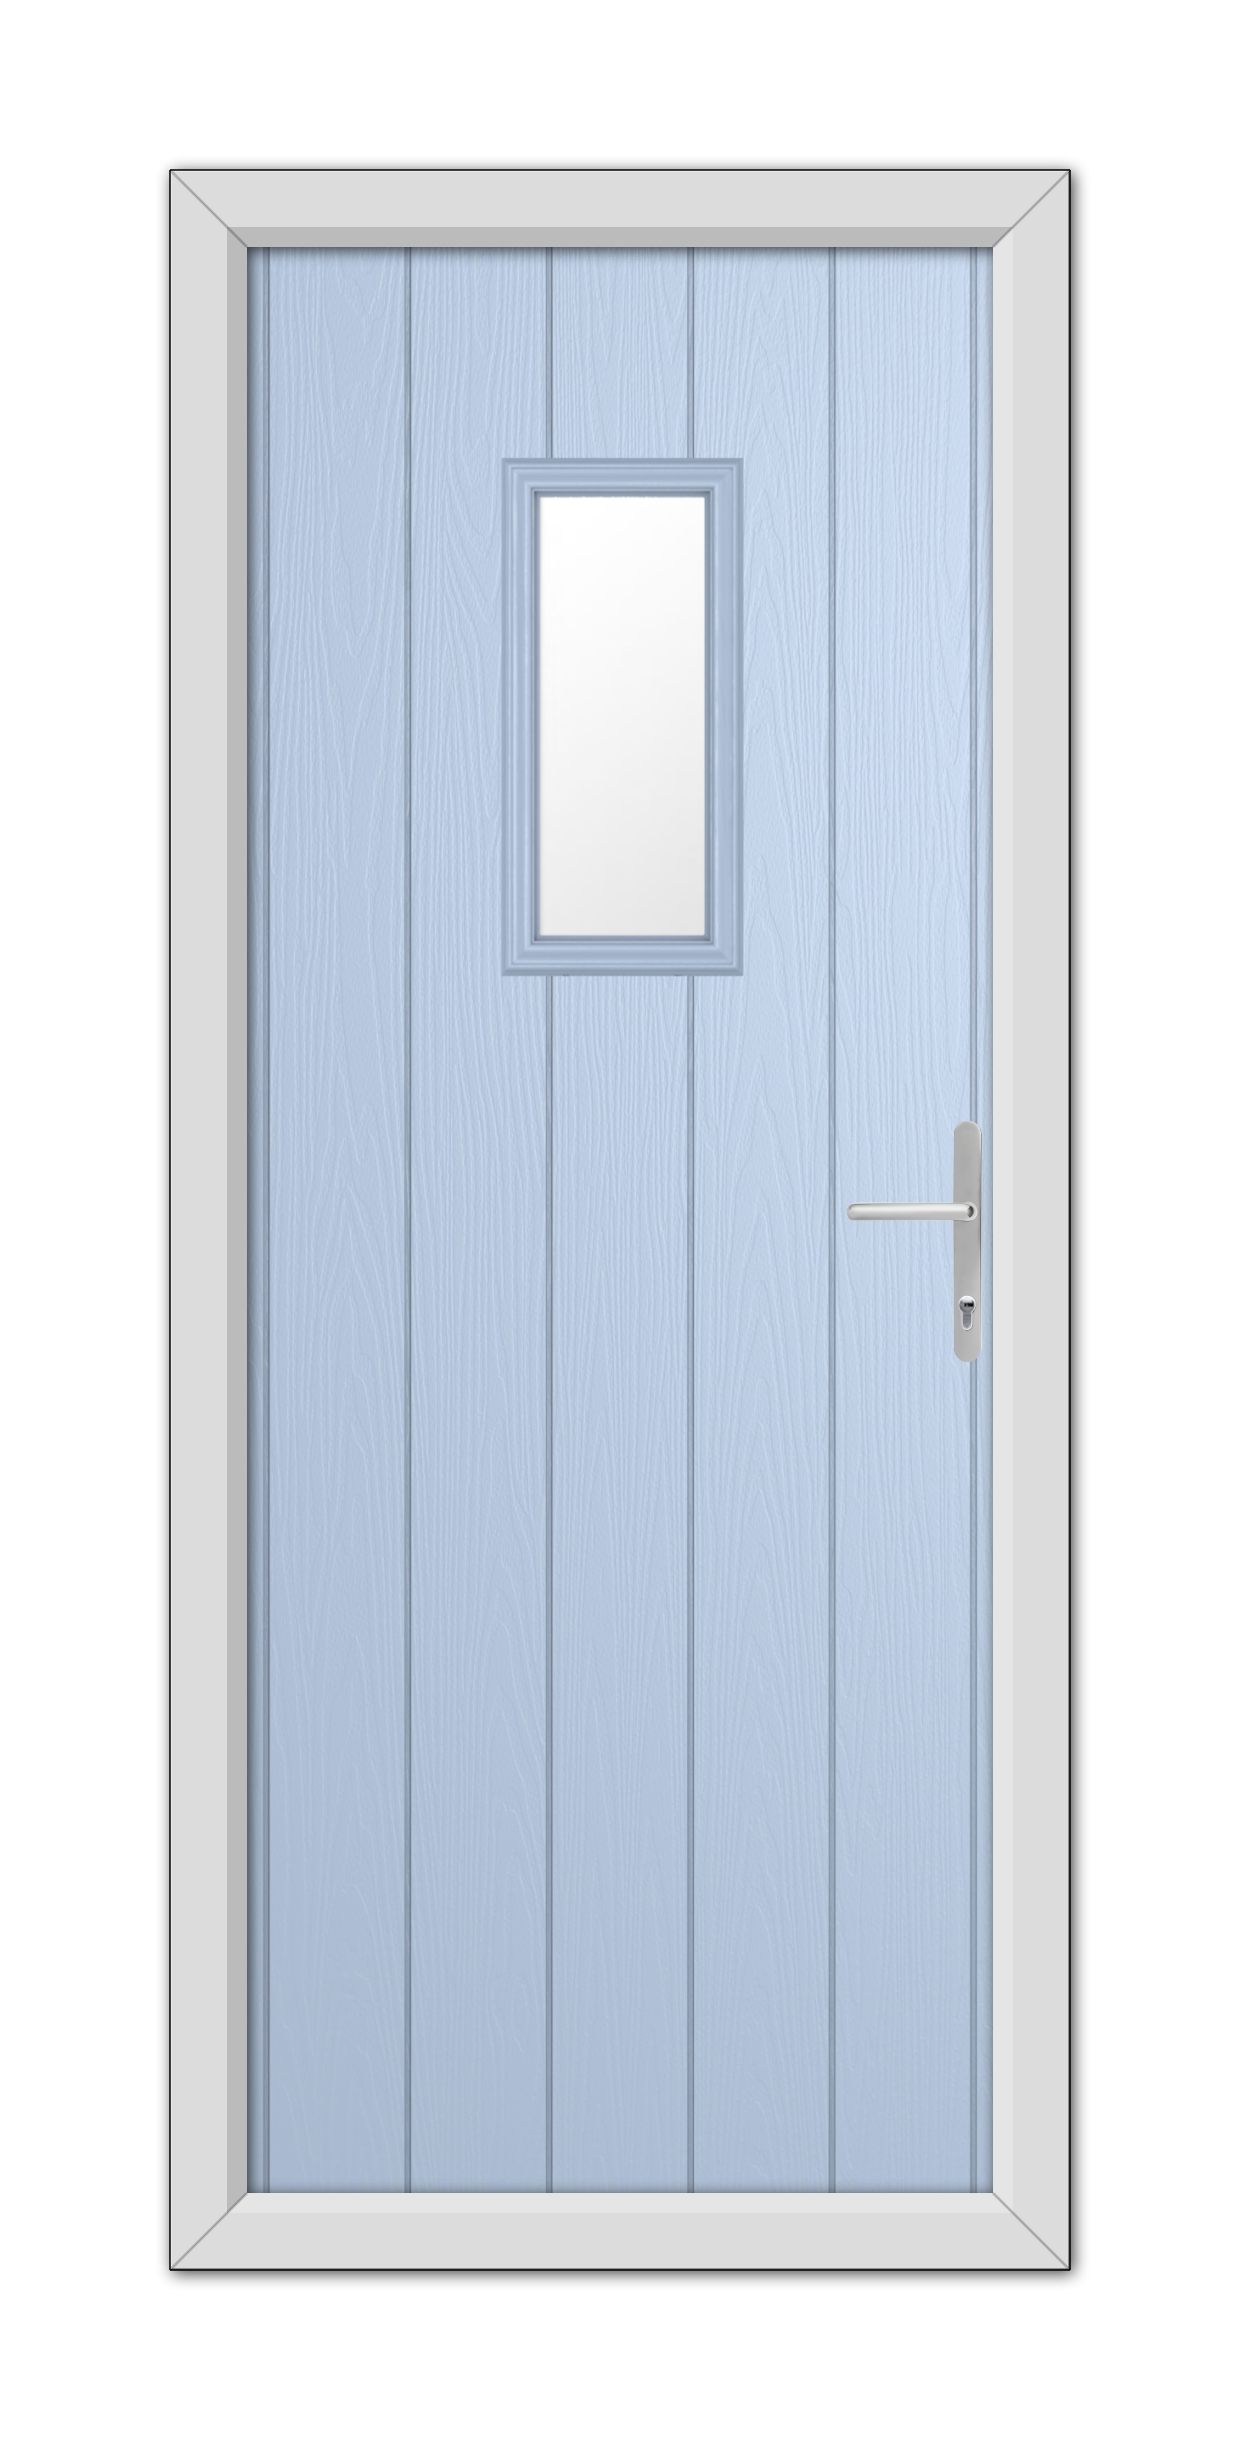 A Duck Egg Blue Somerset Composite Door 48mm Timber Core with a square window, encased in a white frame and equipped with a silver handle, set against a white background.